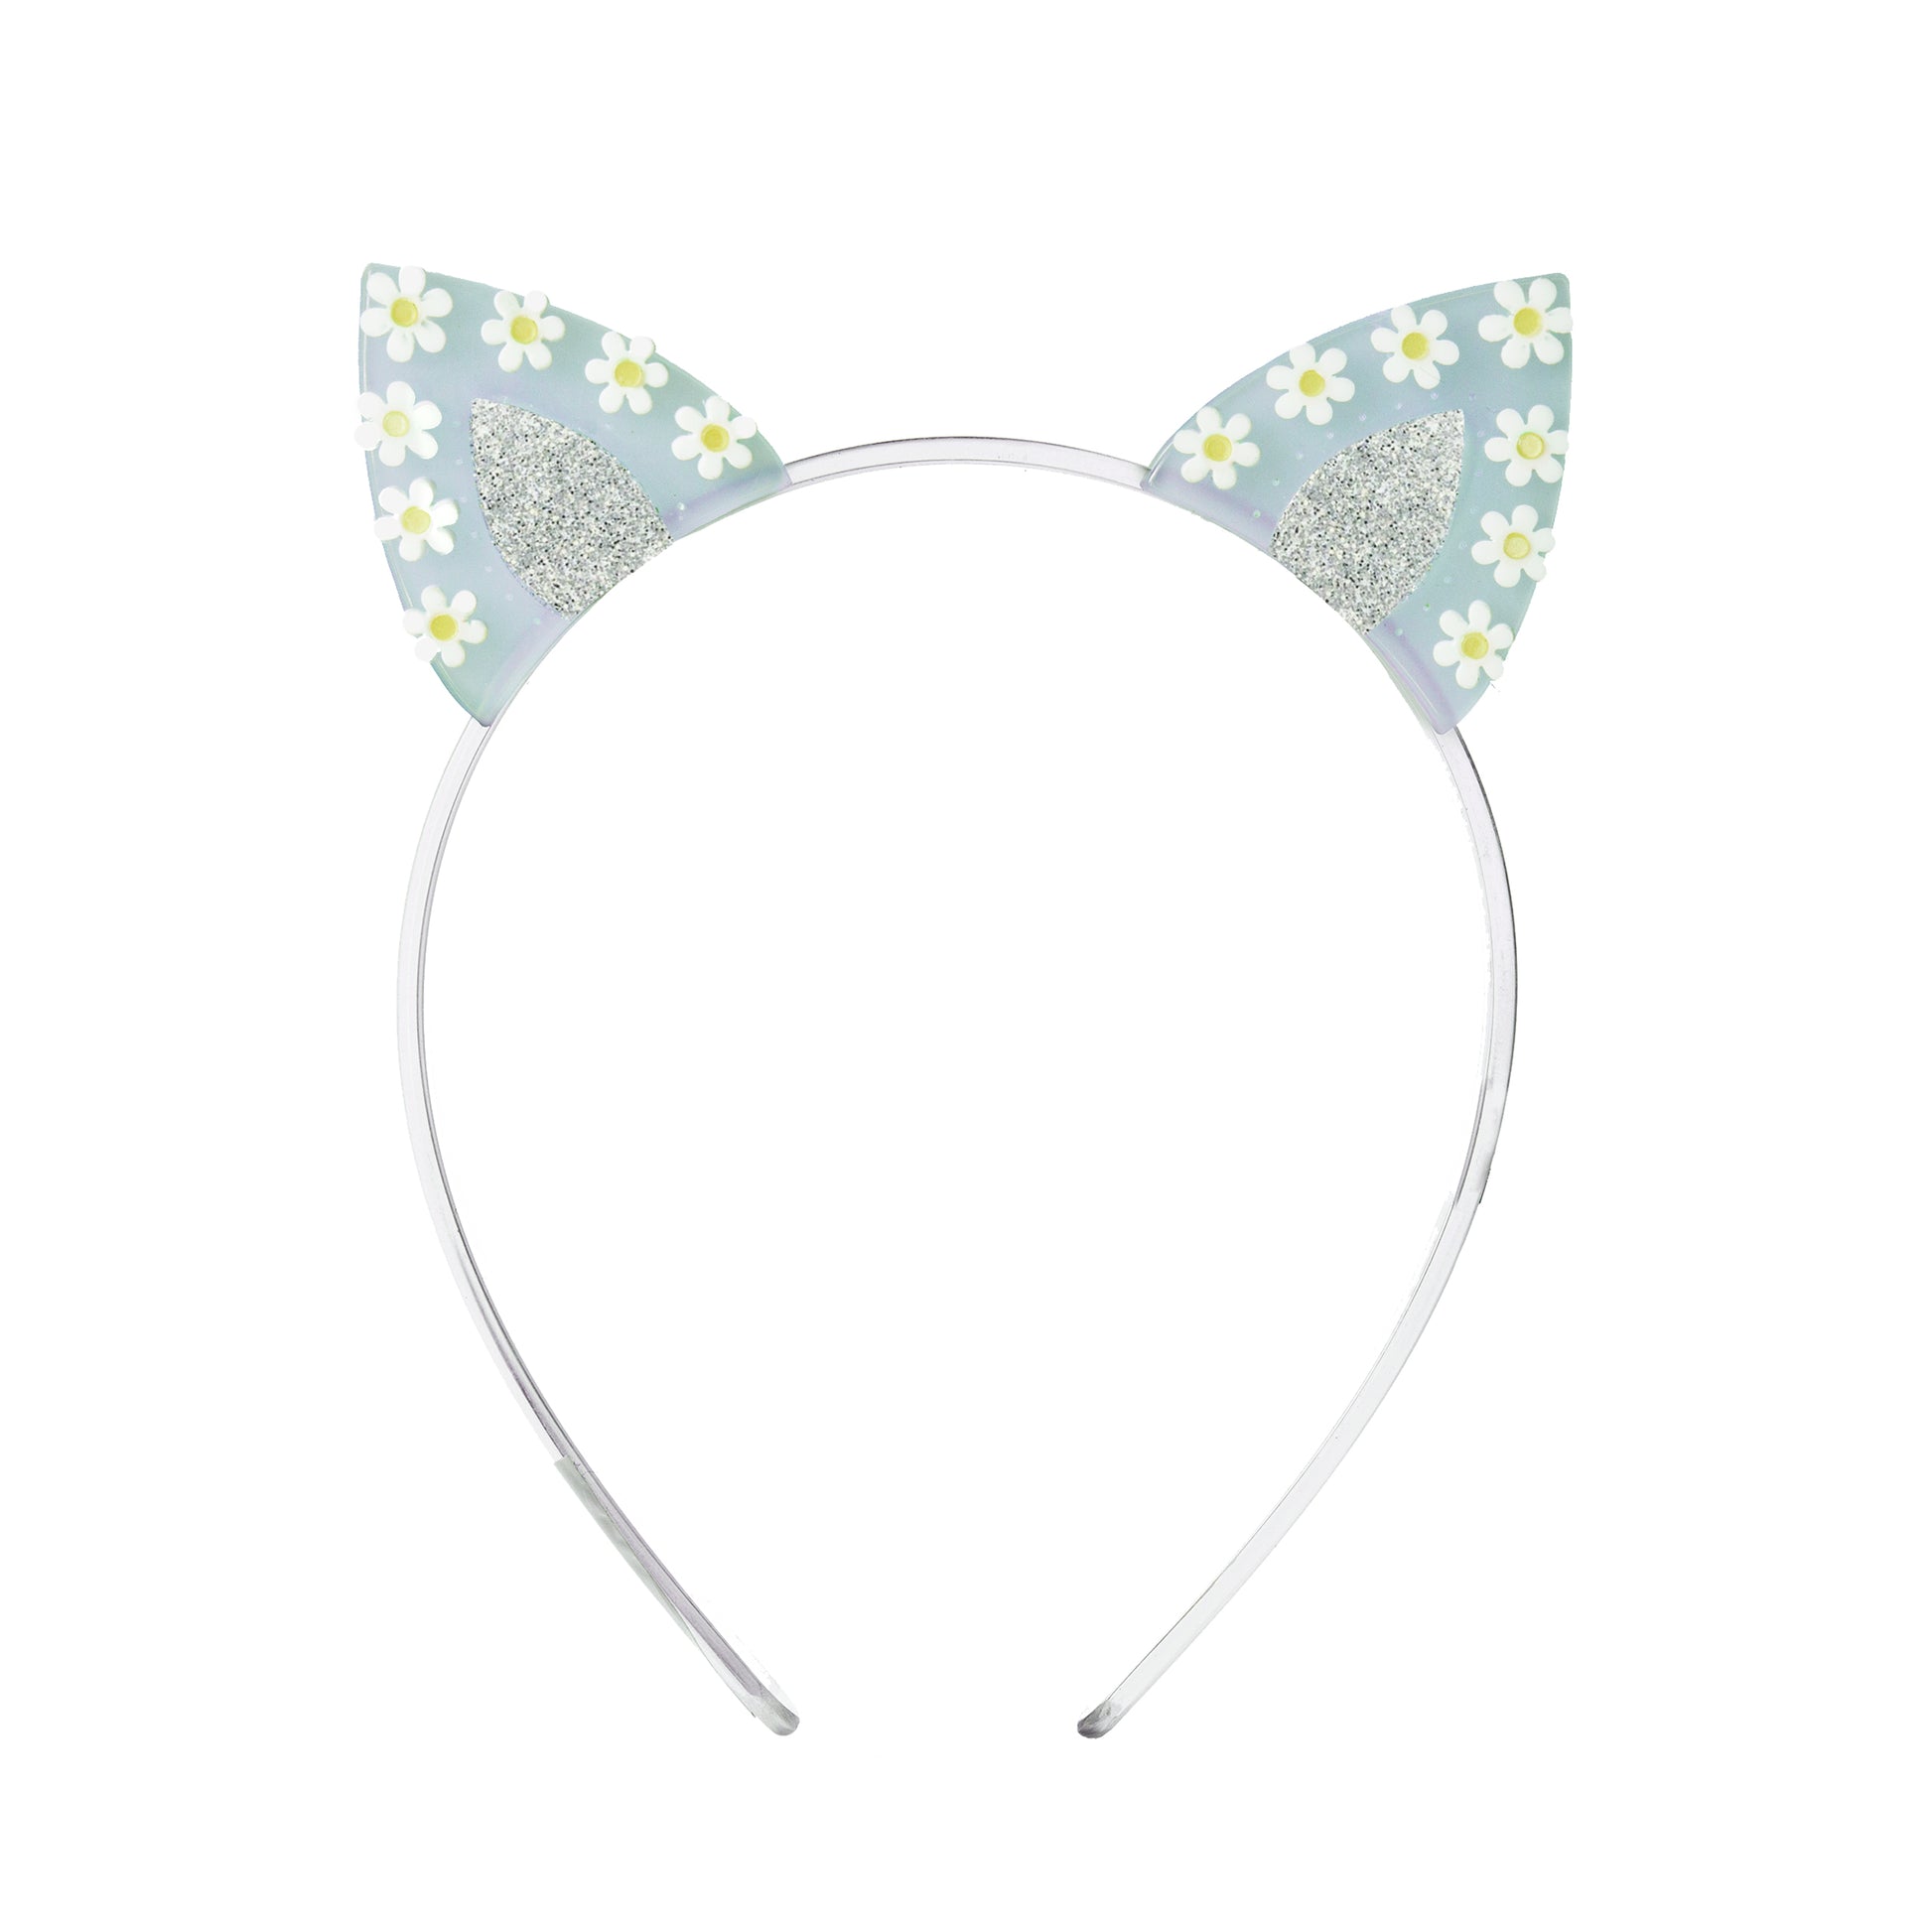 Clear headband adorned with two bunny ears. Bunny ears are blue and silver, adorned with seven daisies on each. 